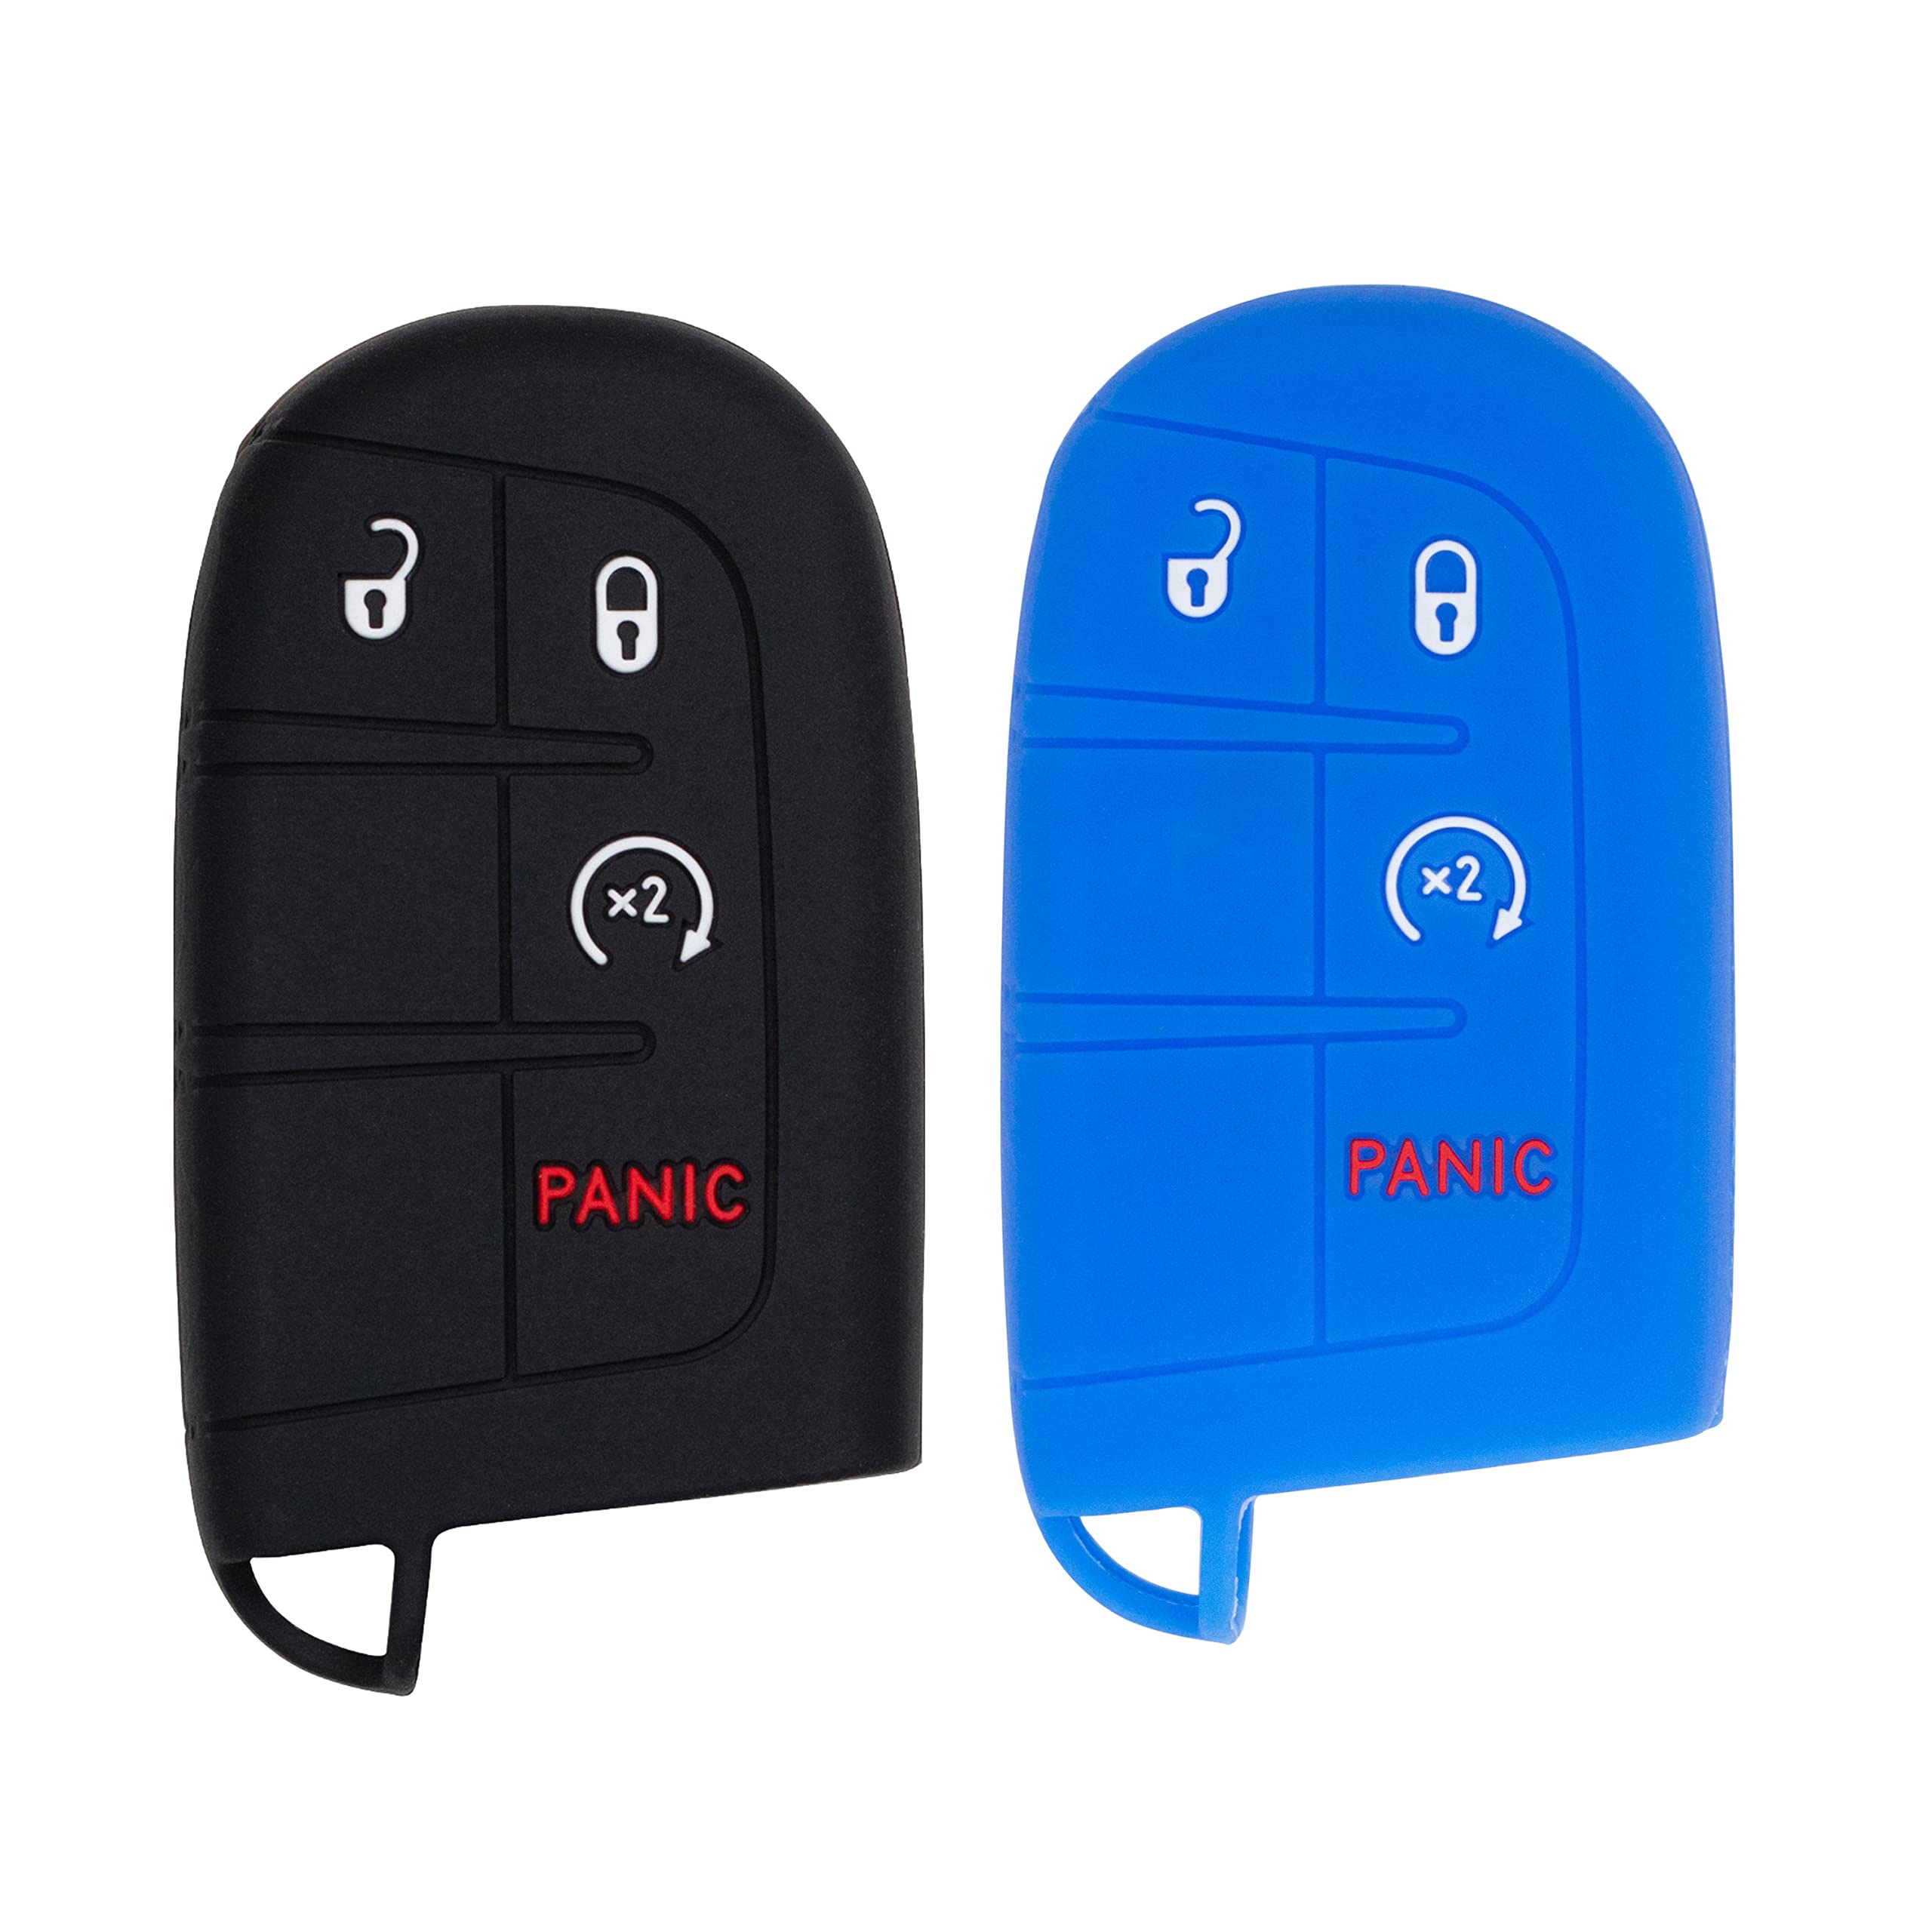 Silicone Case for Keyless entry Smart key fob for Jeep Renegade Grand Cherokee Compass Journey Durango Charger 300 200 Cherokee (Double, Black & Blue)